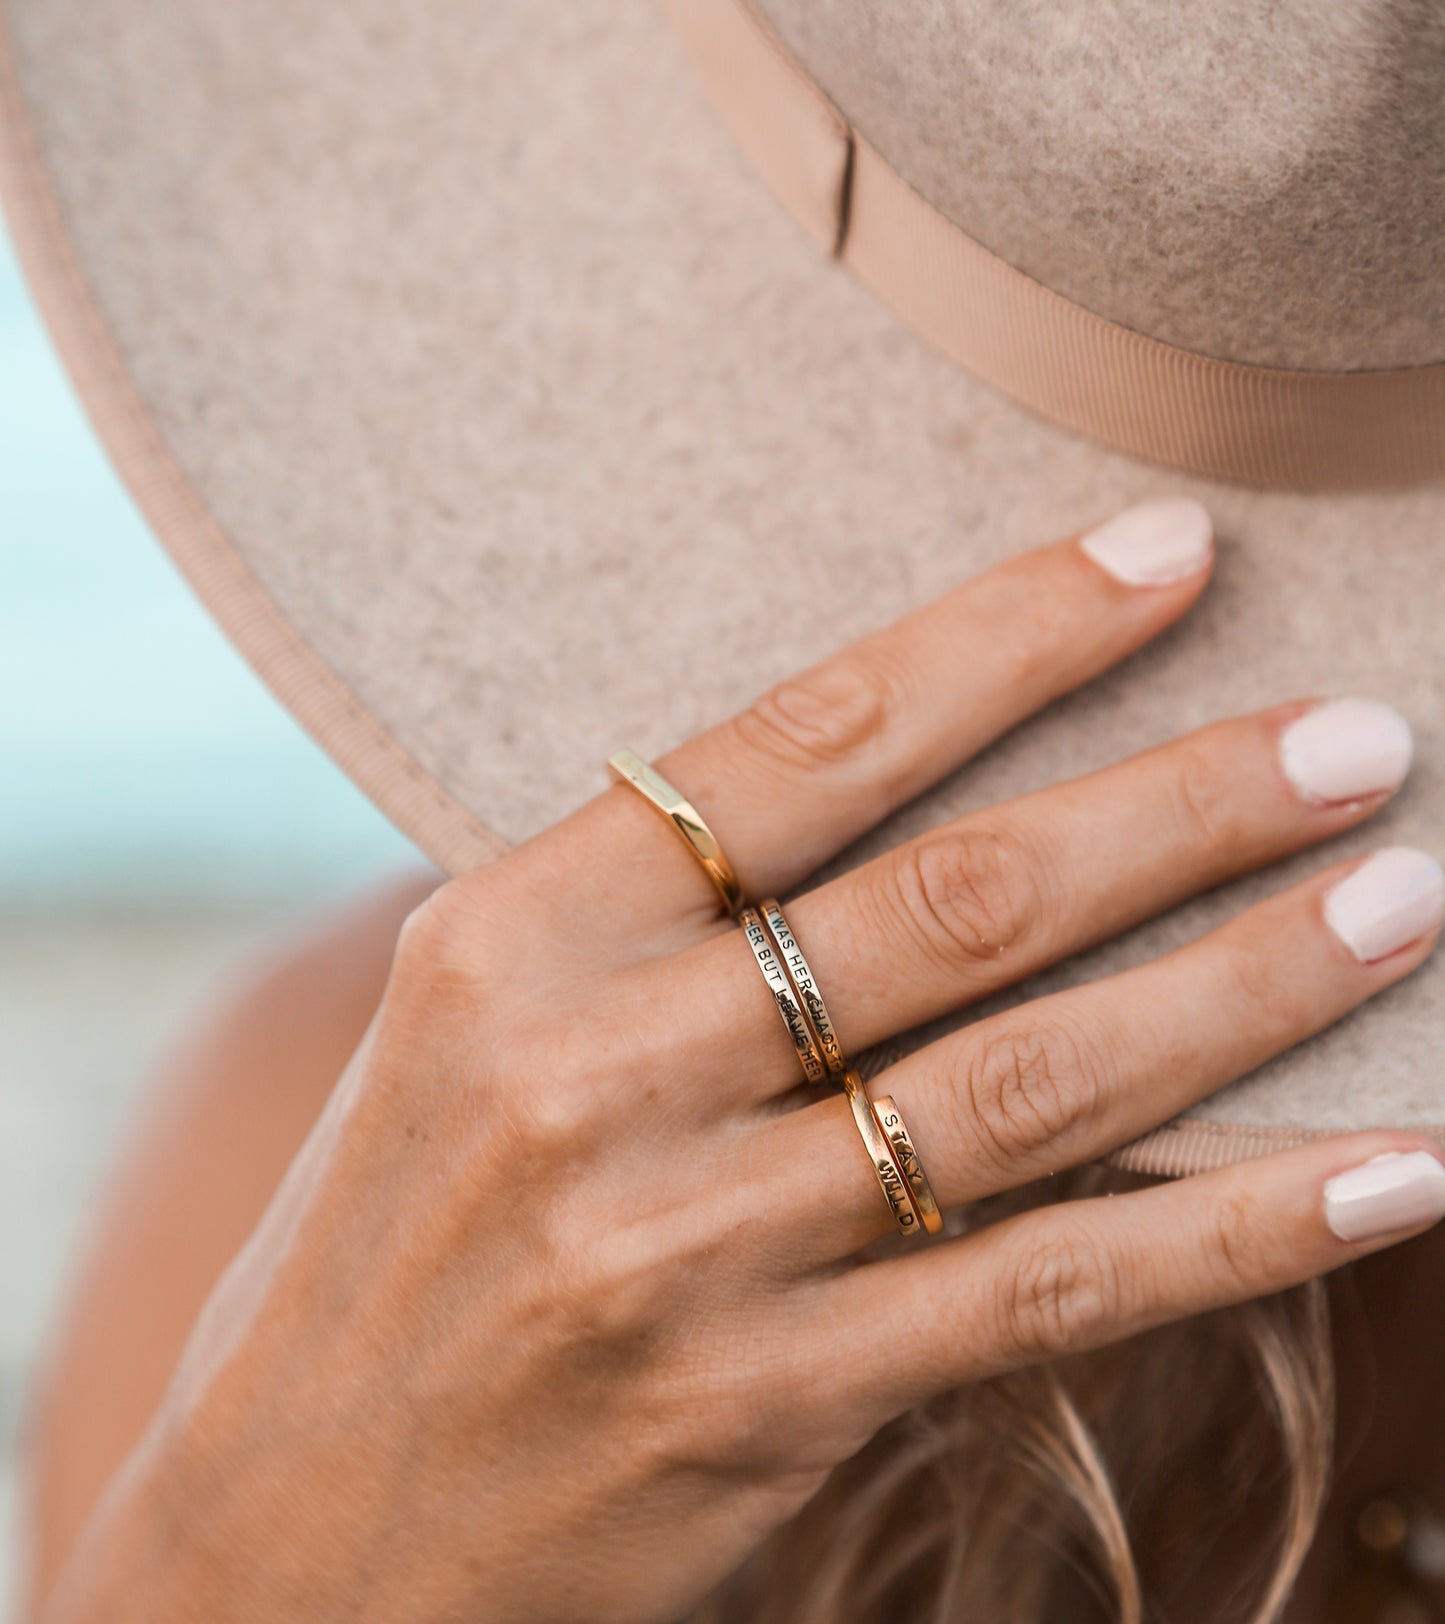 Stay Wild Wrap Ring - Gold